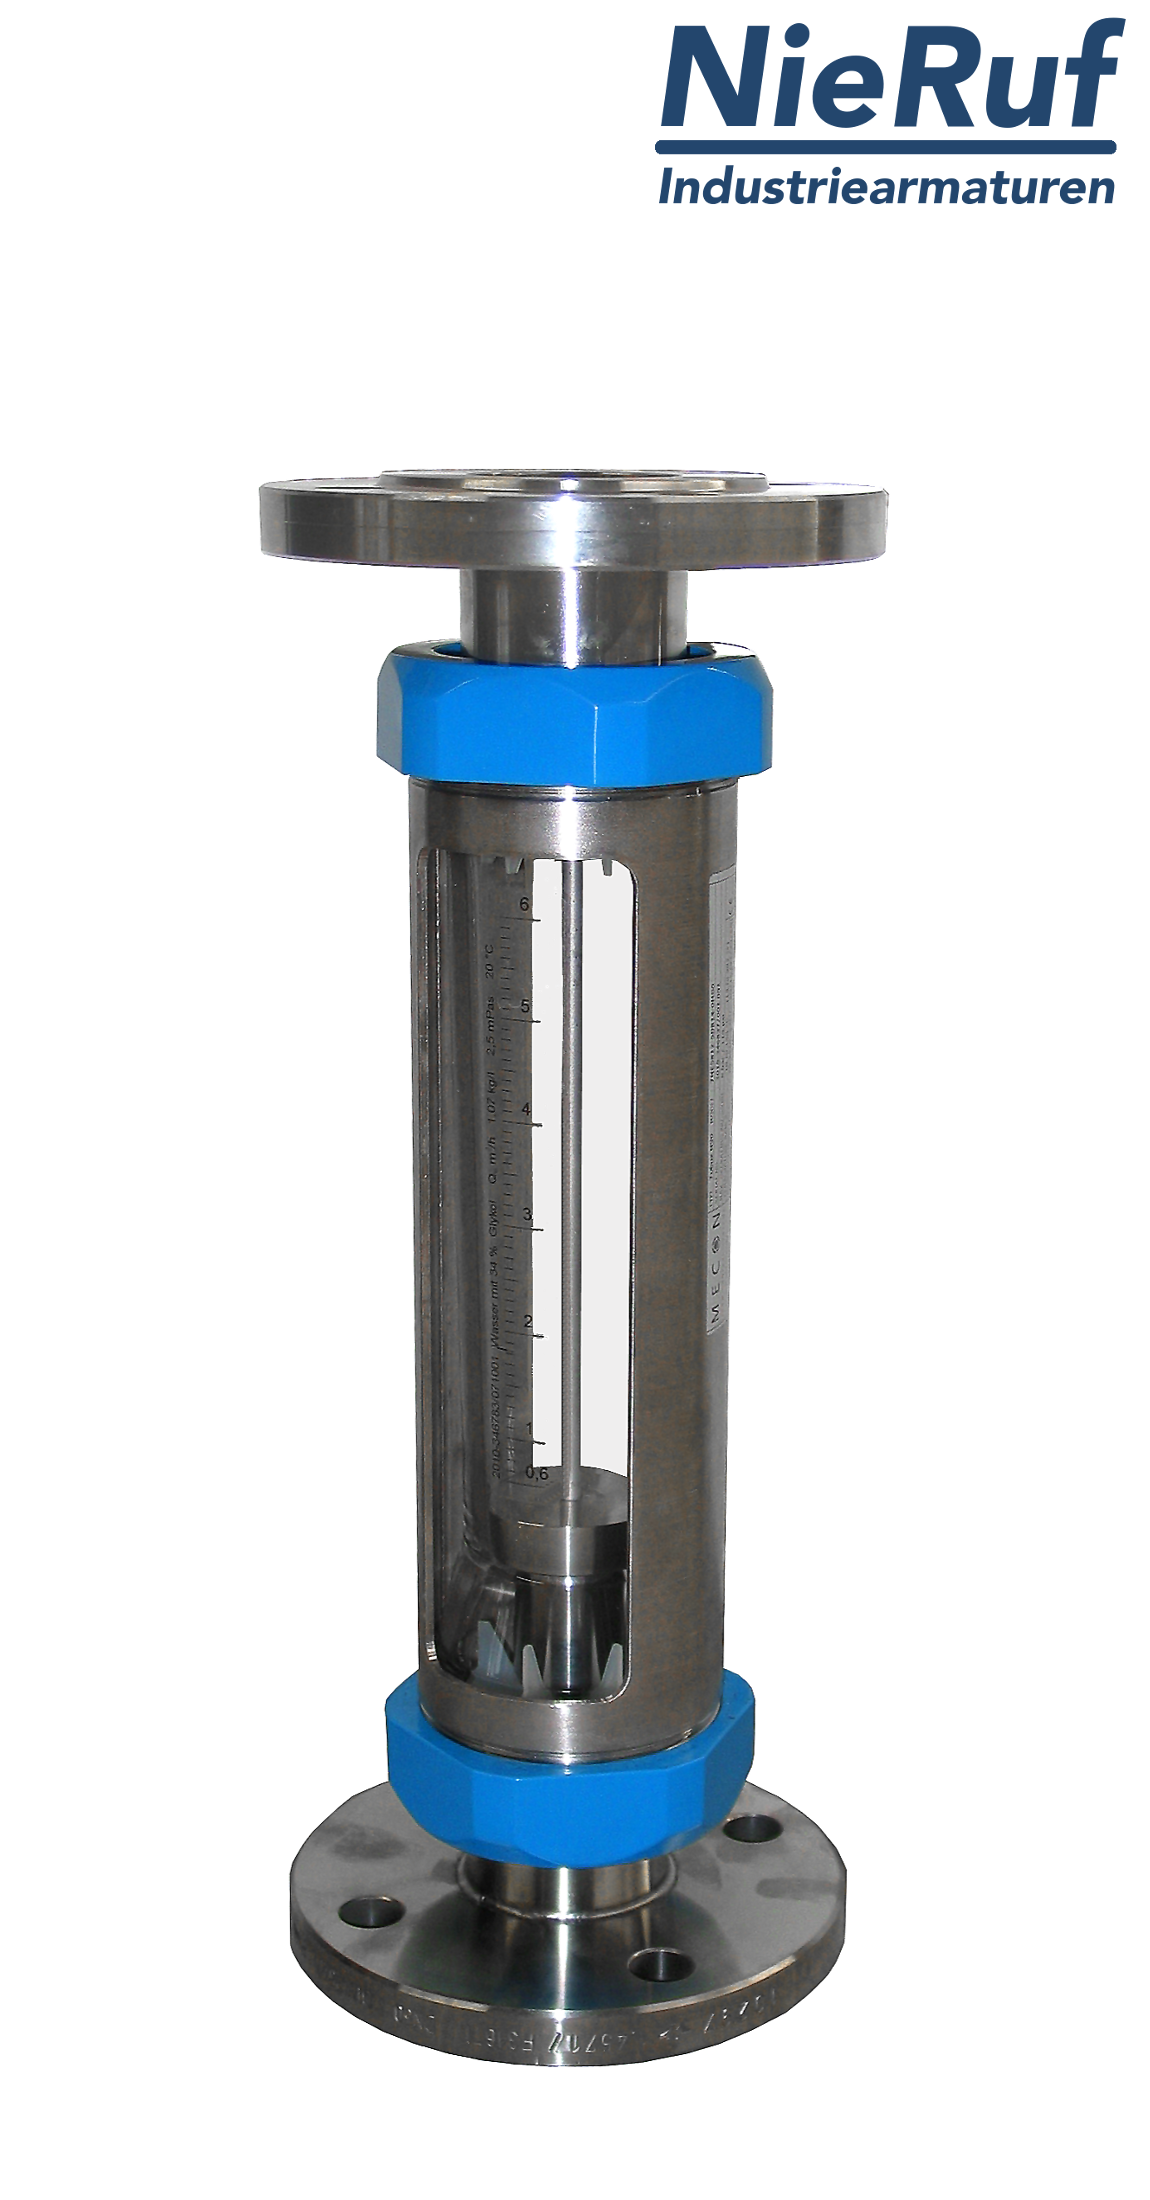 Variable area flowmeter stainless steel + borosilicate flange DN32 65.0 - 650 l/h water FKM